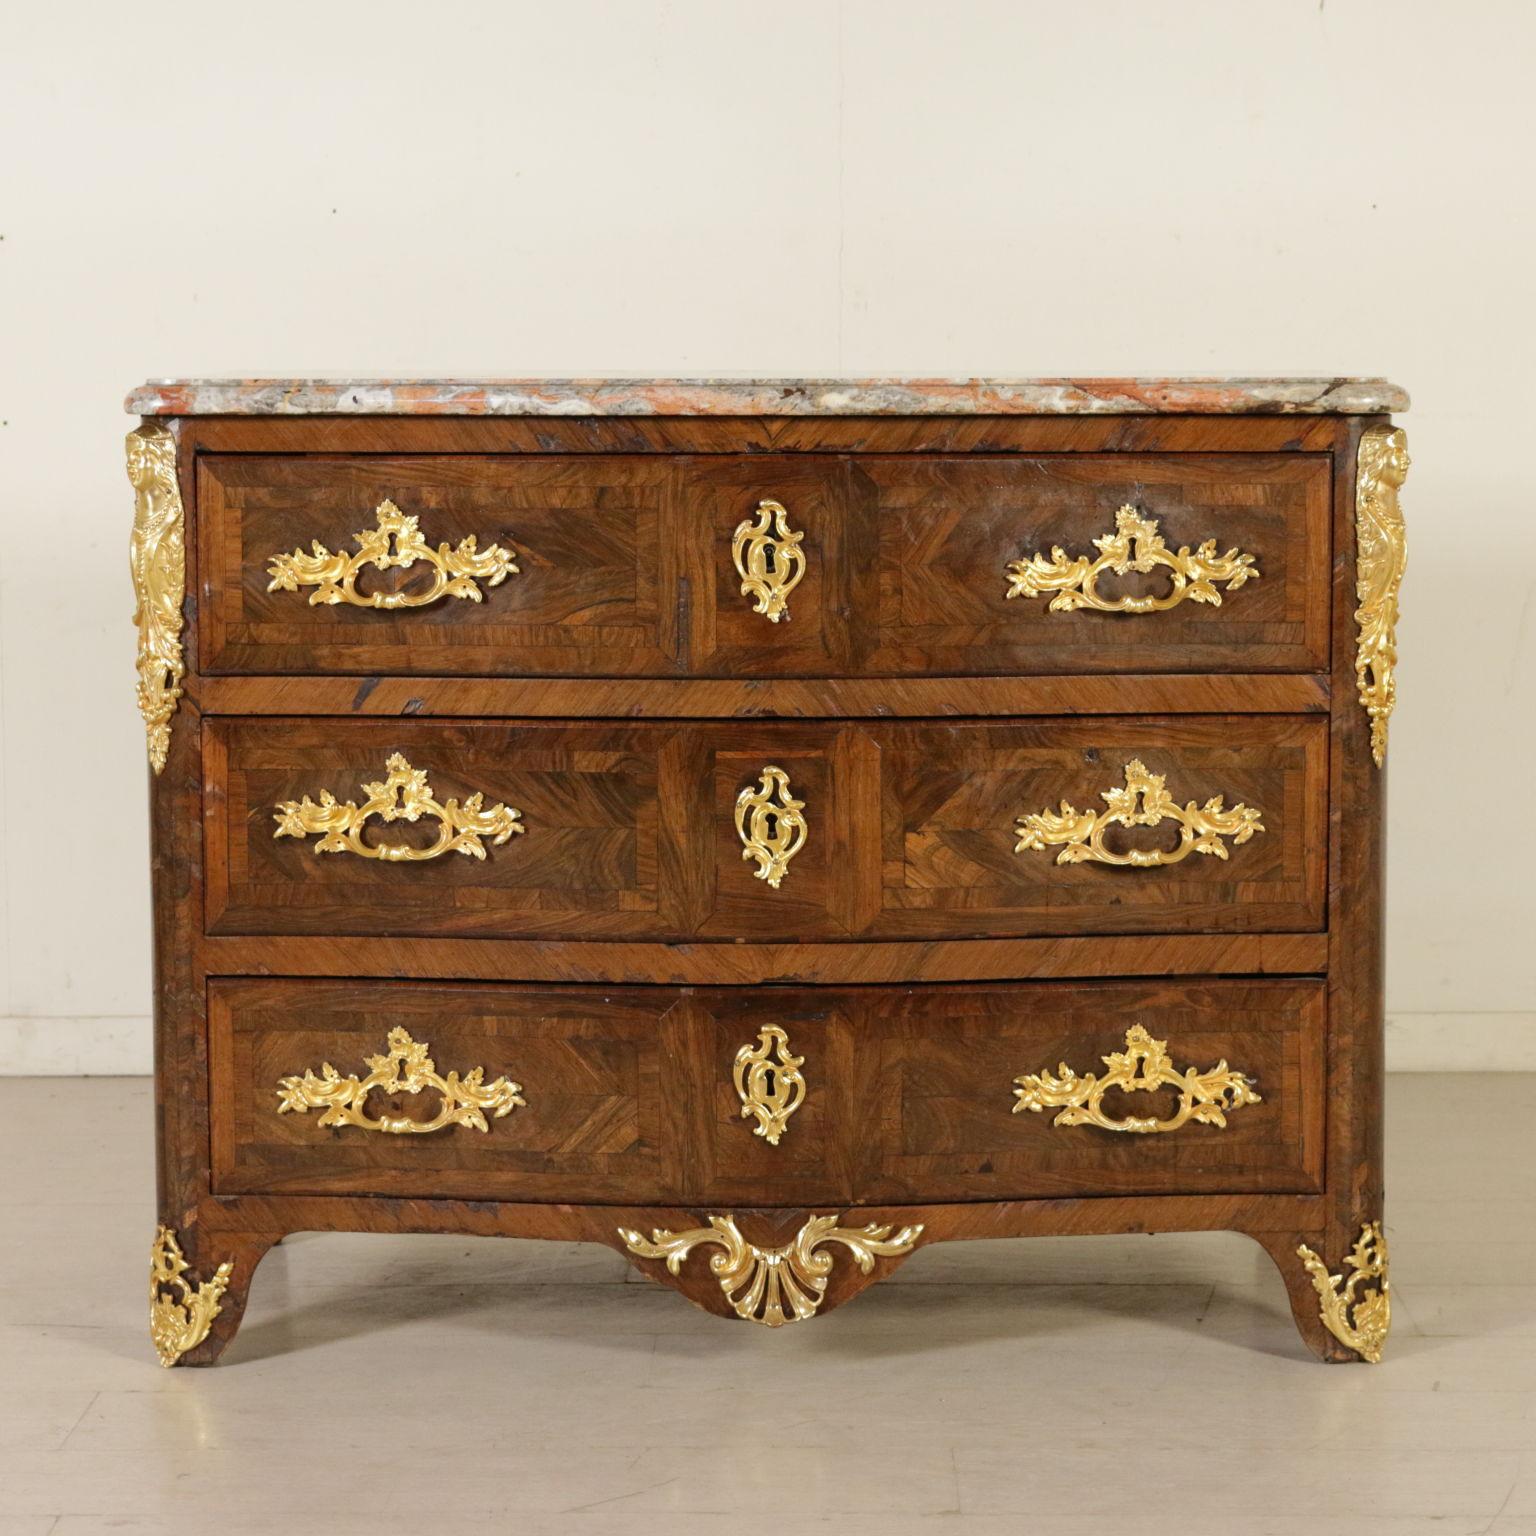 An elegant Regency chest of drawers, serpentine front. Three drawers and wide skirt. Bipartite and quadripartite wood reserves and borders. Embellished with friezes and gilded bronze handle, partly replaced. Shaped marble top. Manufactured in